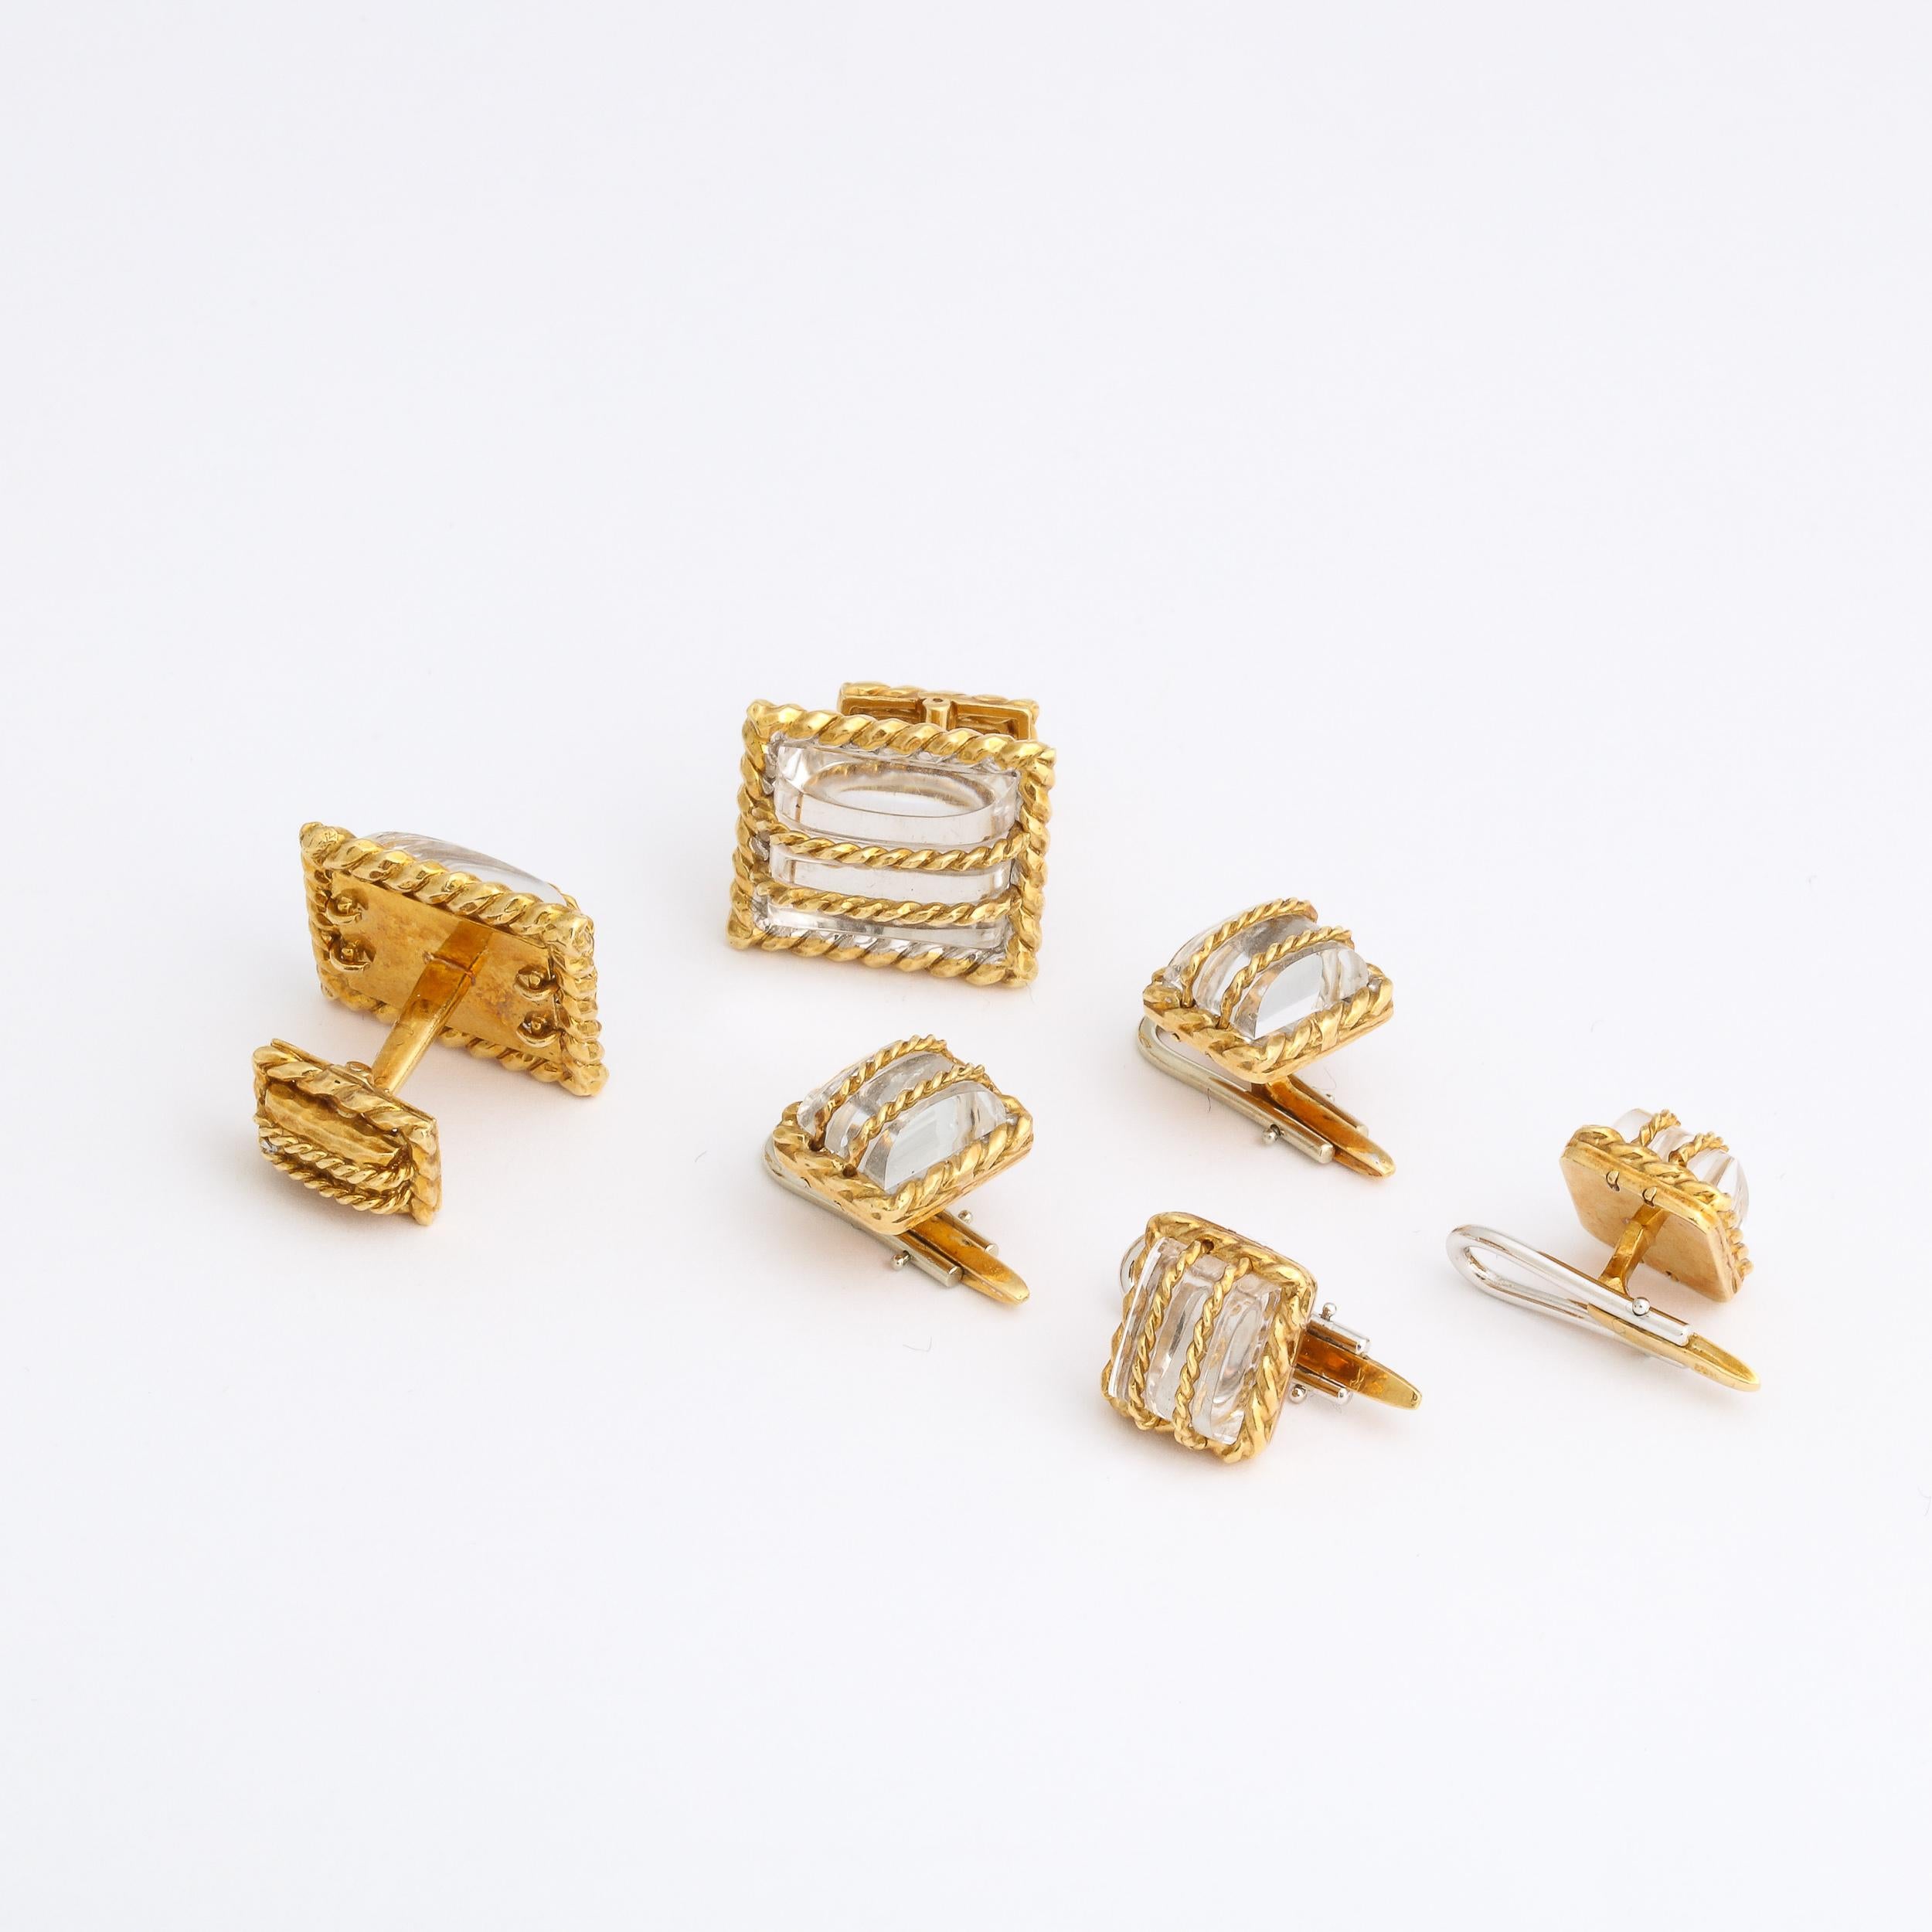 Cabochon David Webb  18k Yellow Gold & Crystal  6 Piece Cufflink and Stud Set  For Sale